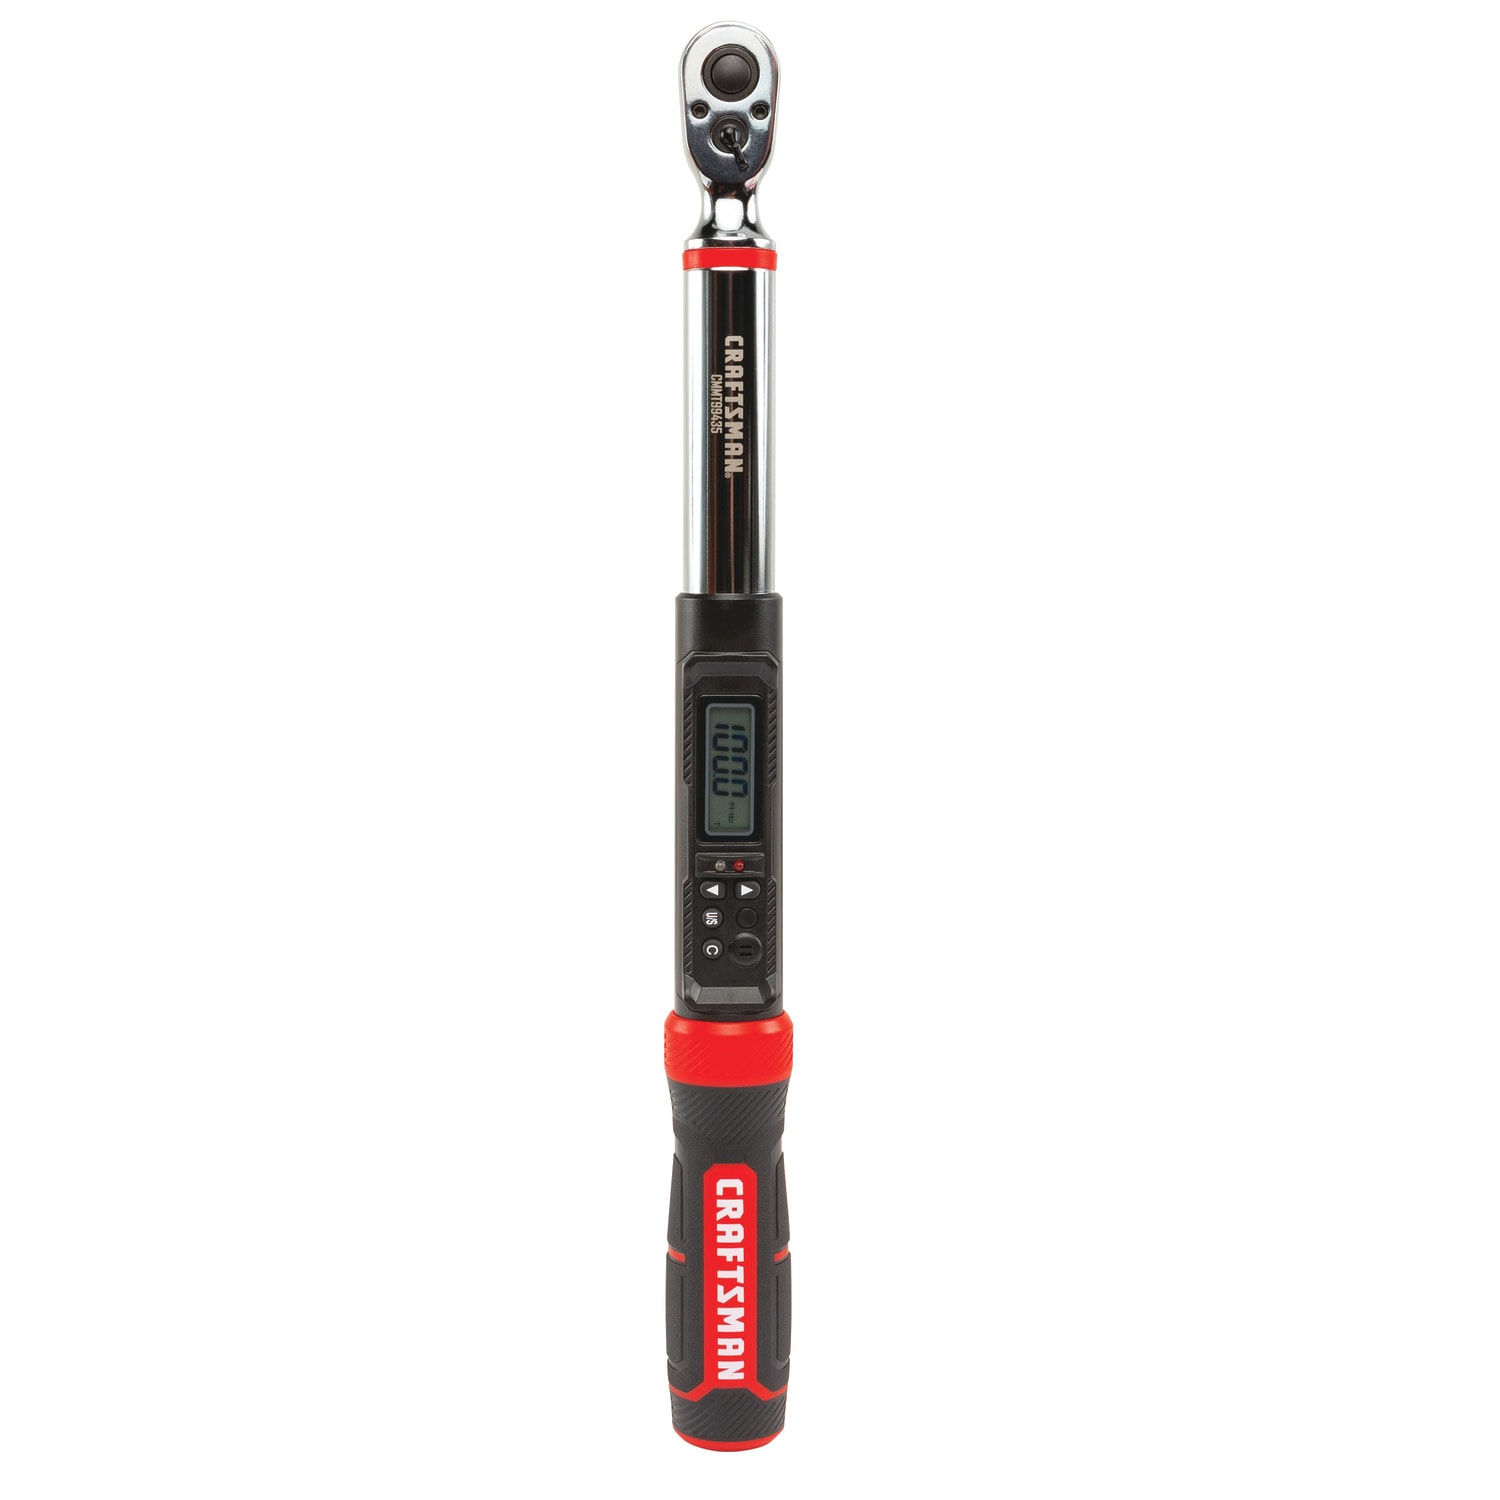 Craftsman 9-31424 10-75 ft lbs 3/8 Drive MicroTork Torque Wrench 